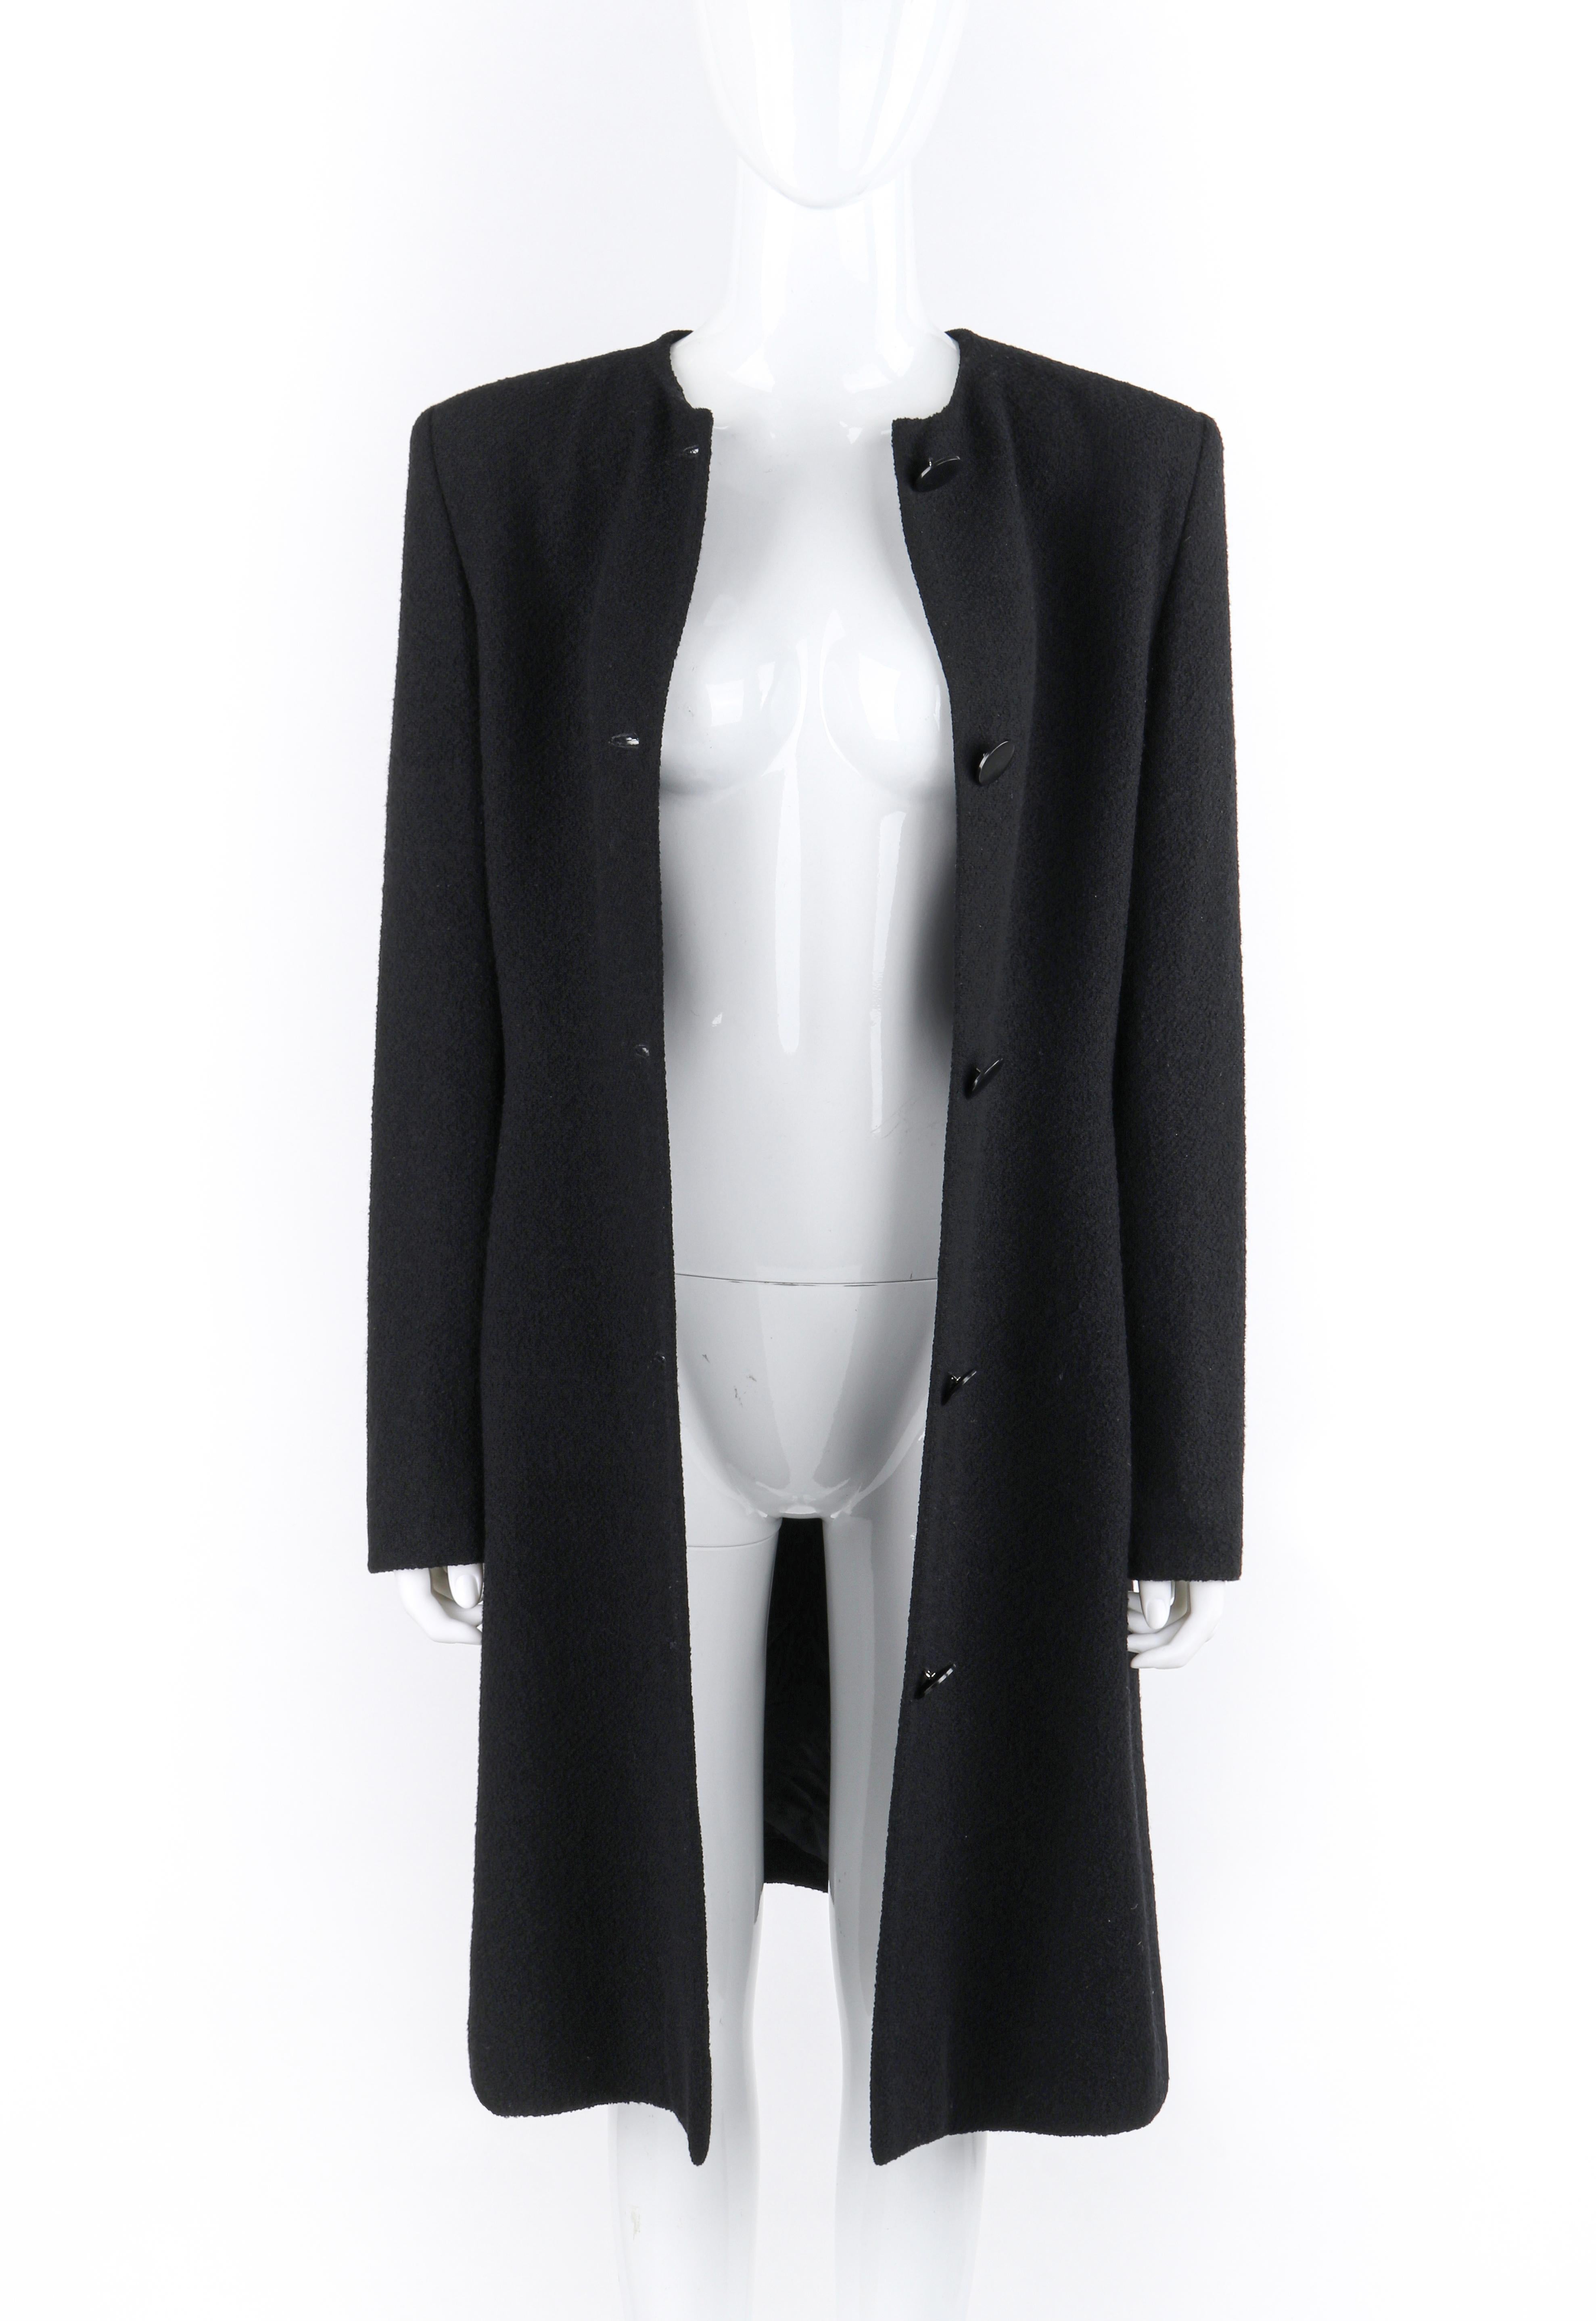 GIVENCHY Couture A/W 1998 ALEXANDER McQUEEN Black Button Up Tailored Coat For Sale 3